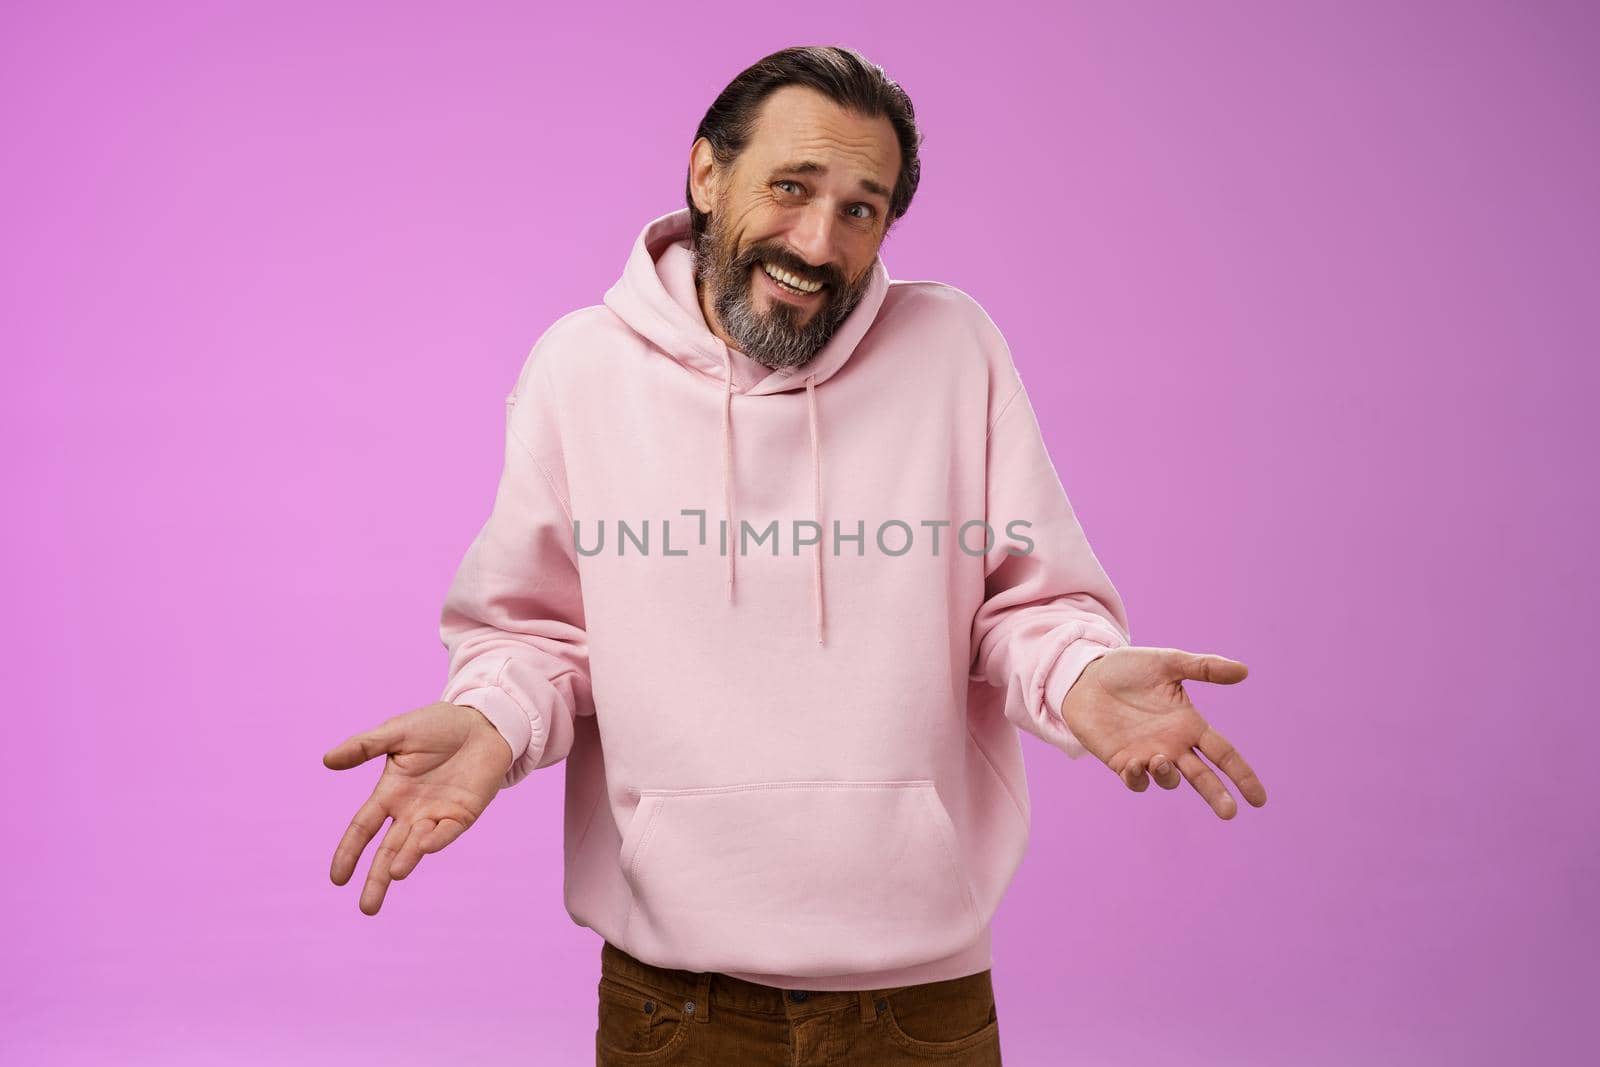 Portrait doubtful unsure awkward mature man shrugging spread hands sideways clueless cringing frowning hesitant cannot say yes no facing hard decision standing perplexed purple background.